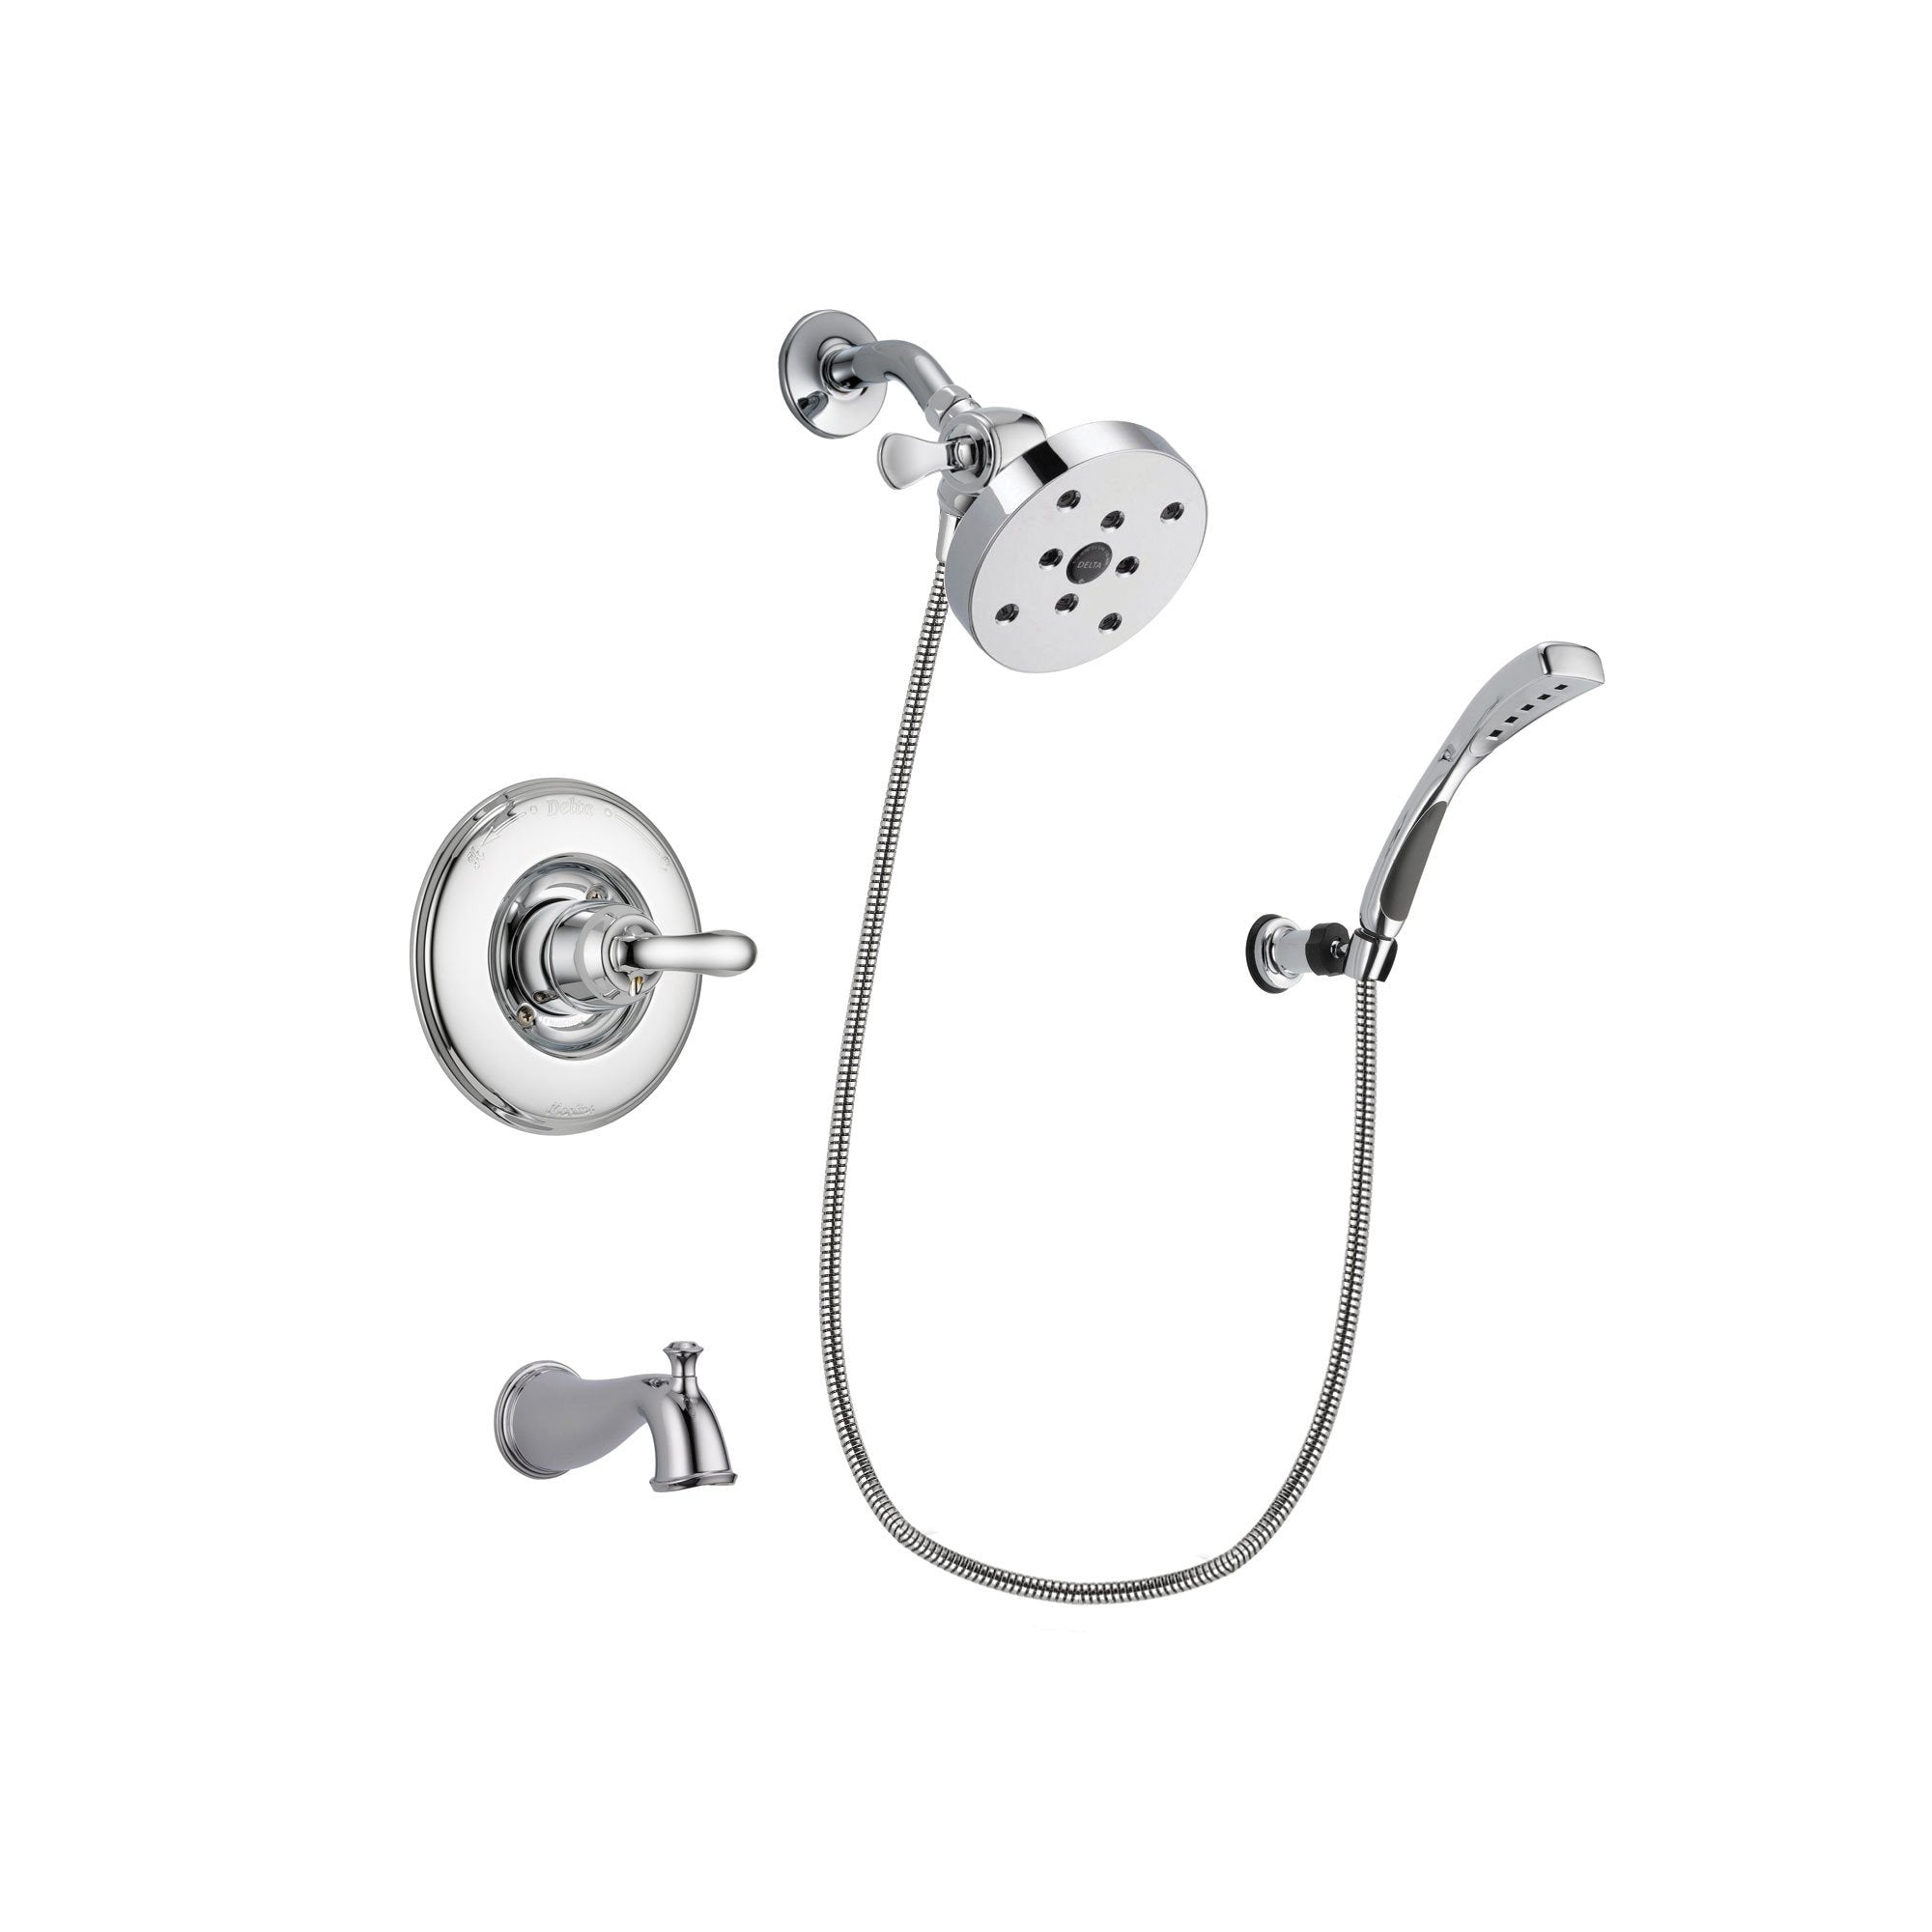 Delta Linden Chrome Finish Tub and Shower Faucet System Package with 5-1/2 inch Shower Head and Wall-Mount Bracket with Handheld Shower Spray Includes Rough-in Valve and Tub Spout DSP1089V